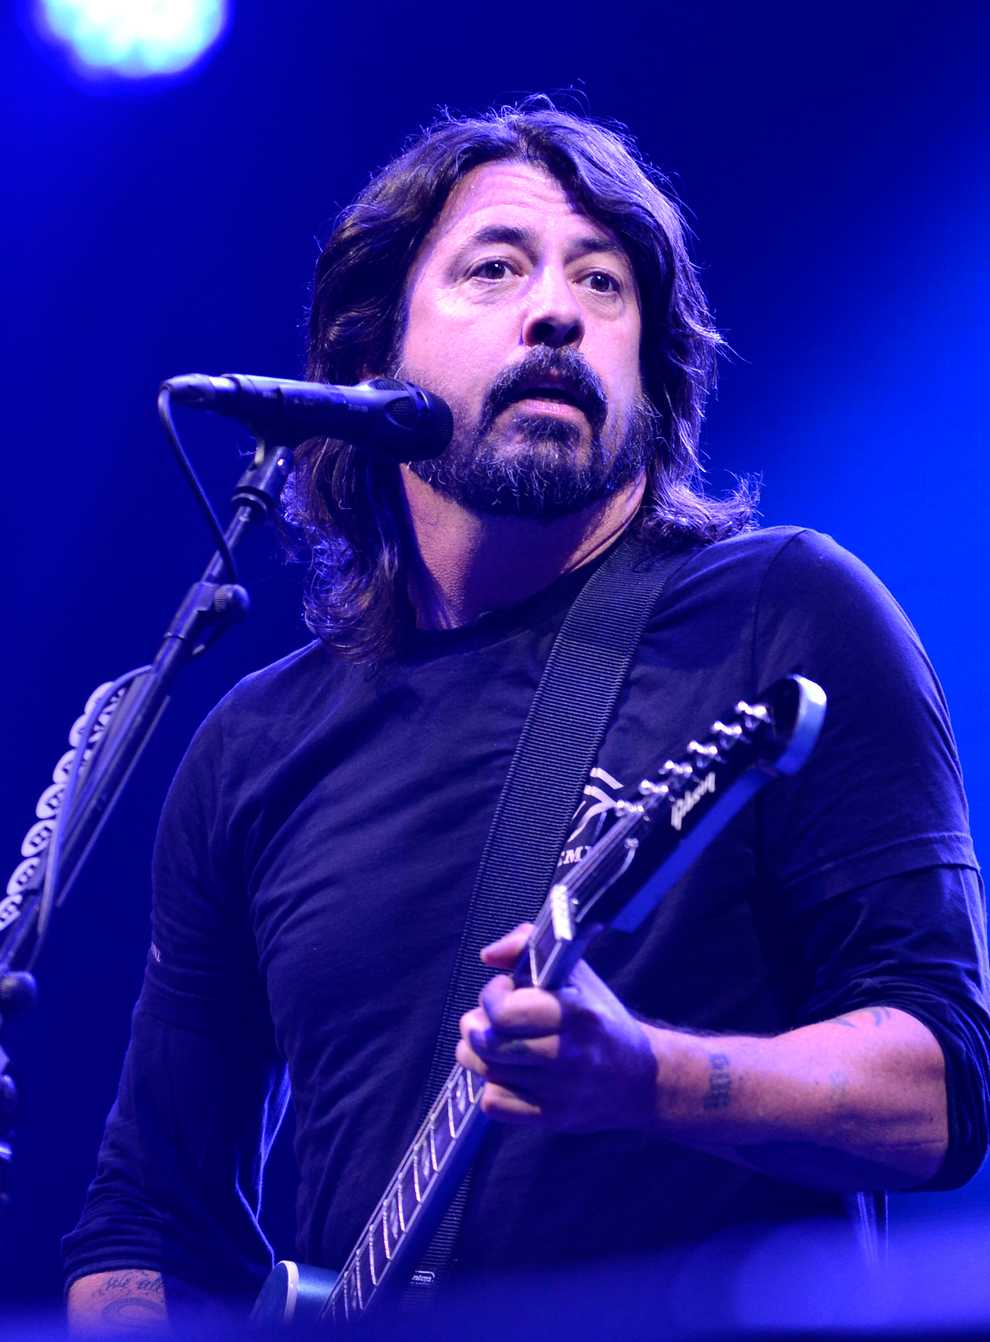 Grohl has said he speaks to his mother about the issue a lot